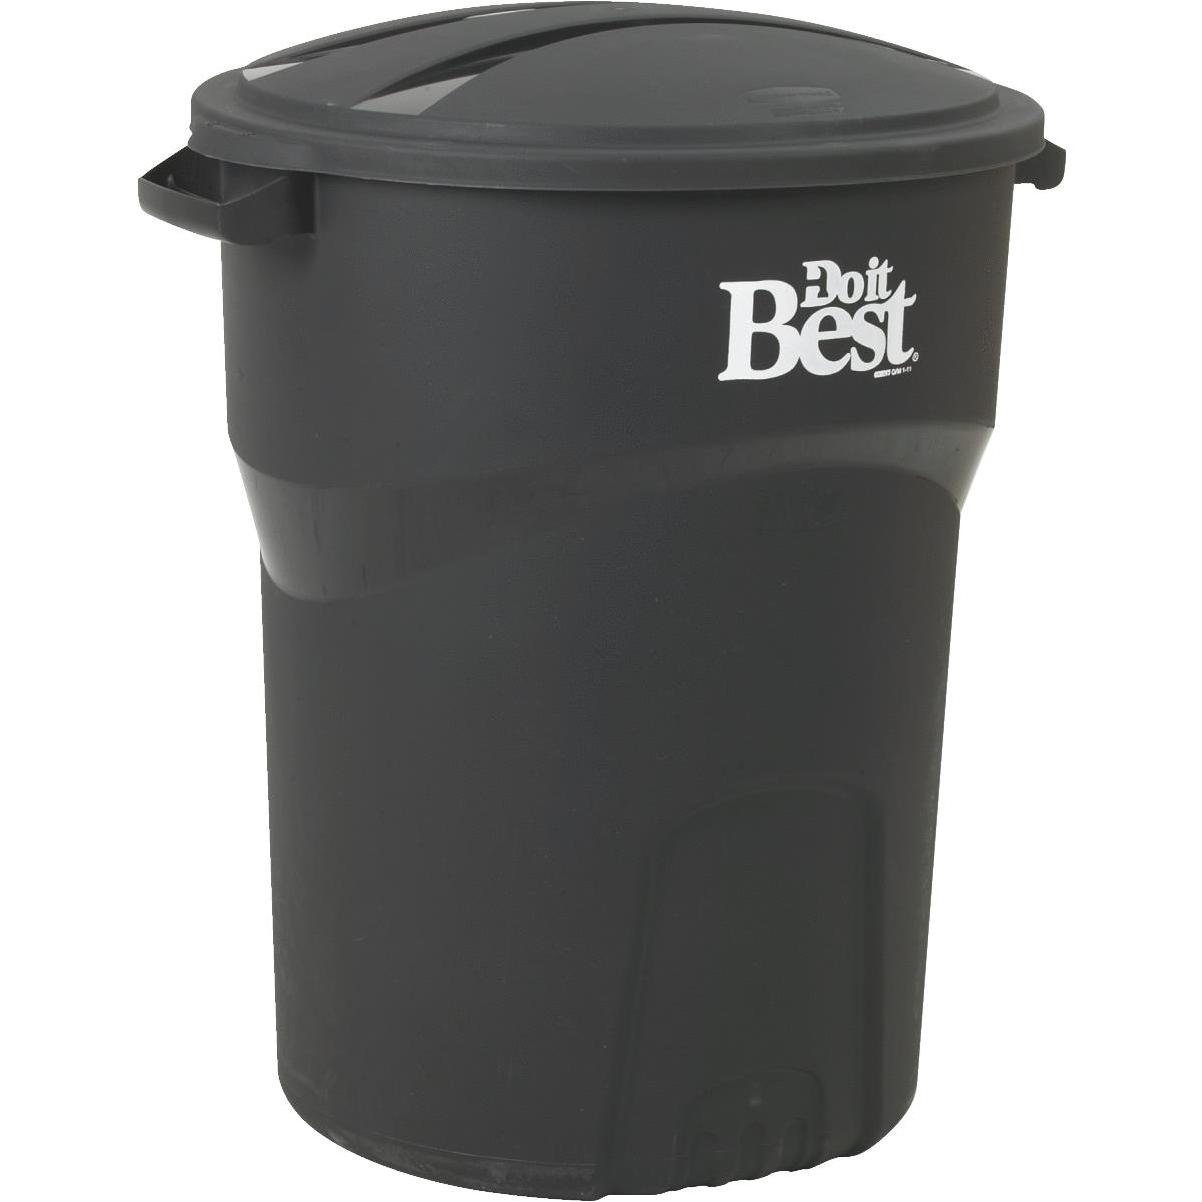 United Solutions Rough & Rugged 32 Gal. Black Wheeled Trash Can